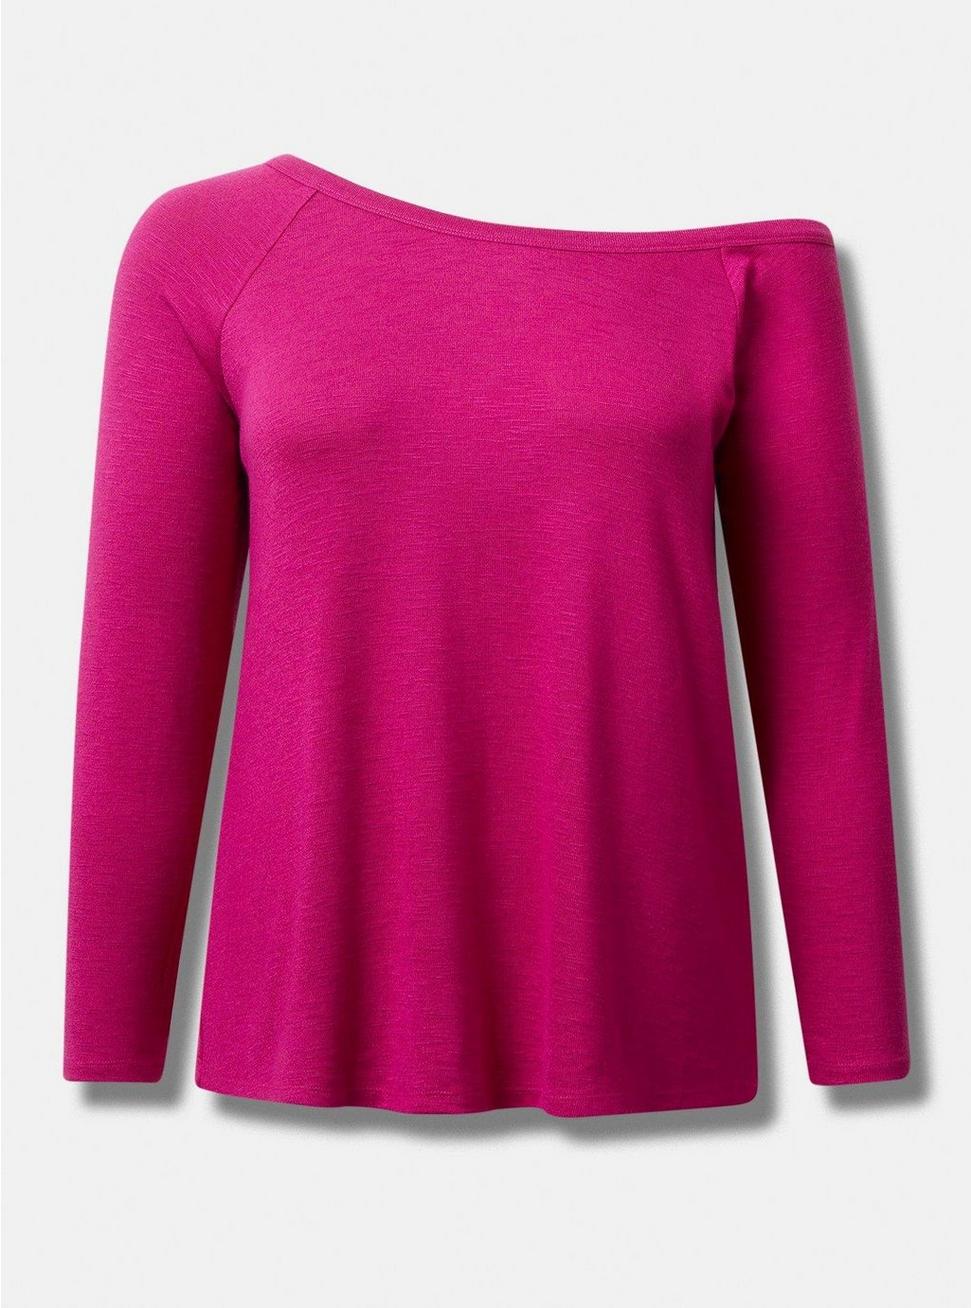 Light Weight Hacci Off The Shoulder Lounge Tee, DOUBLE DYE FUCHSIA RED, hi-res